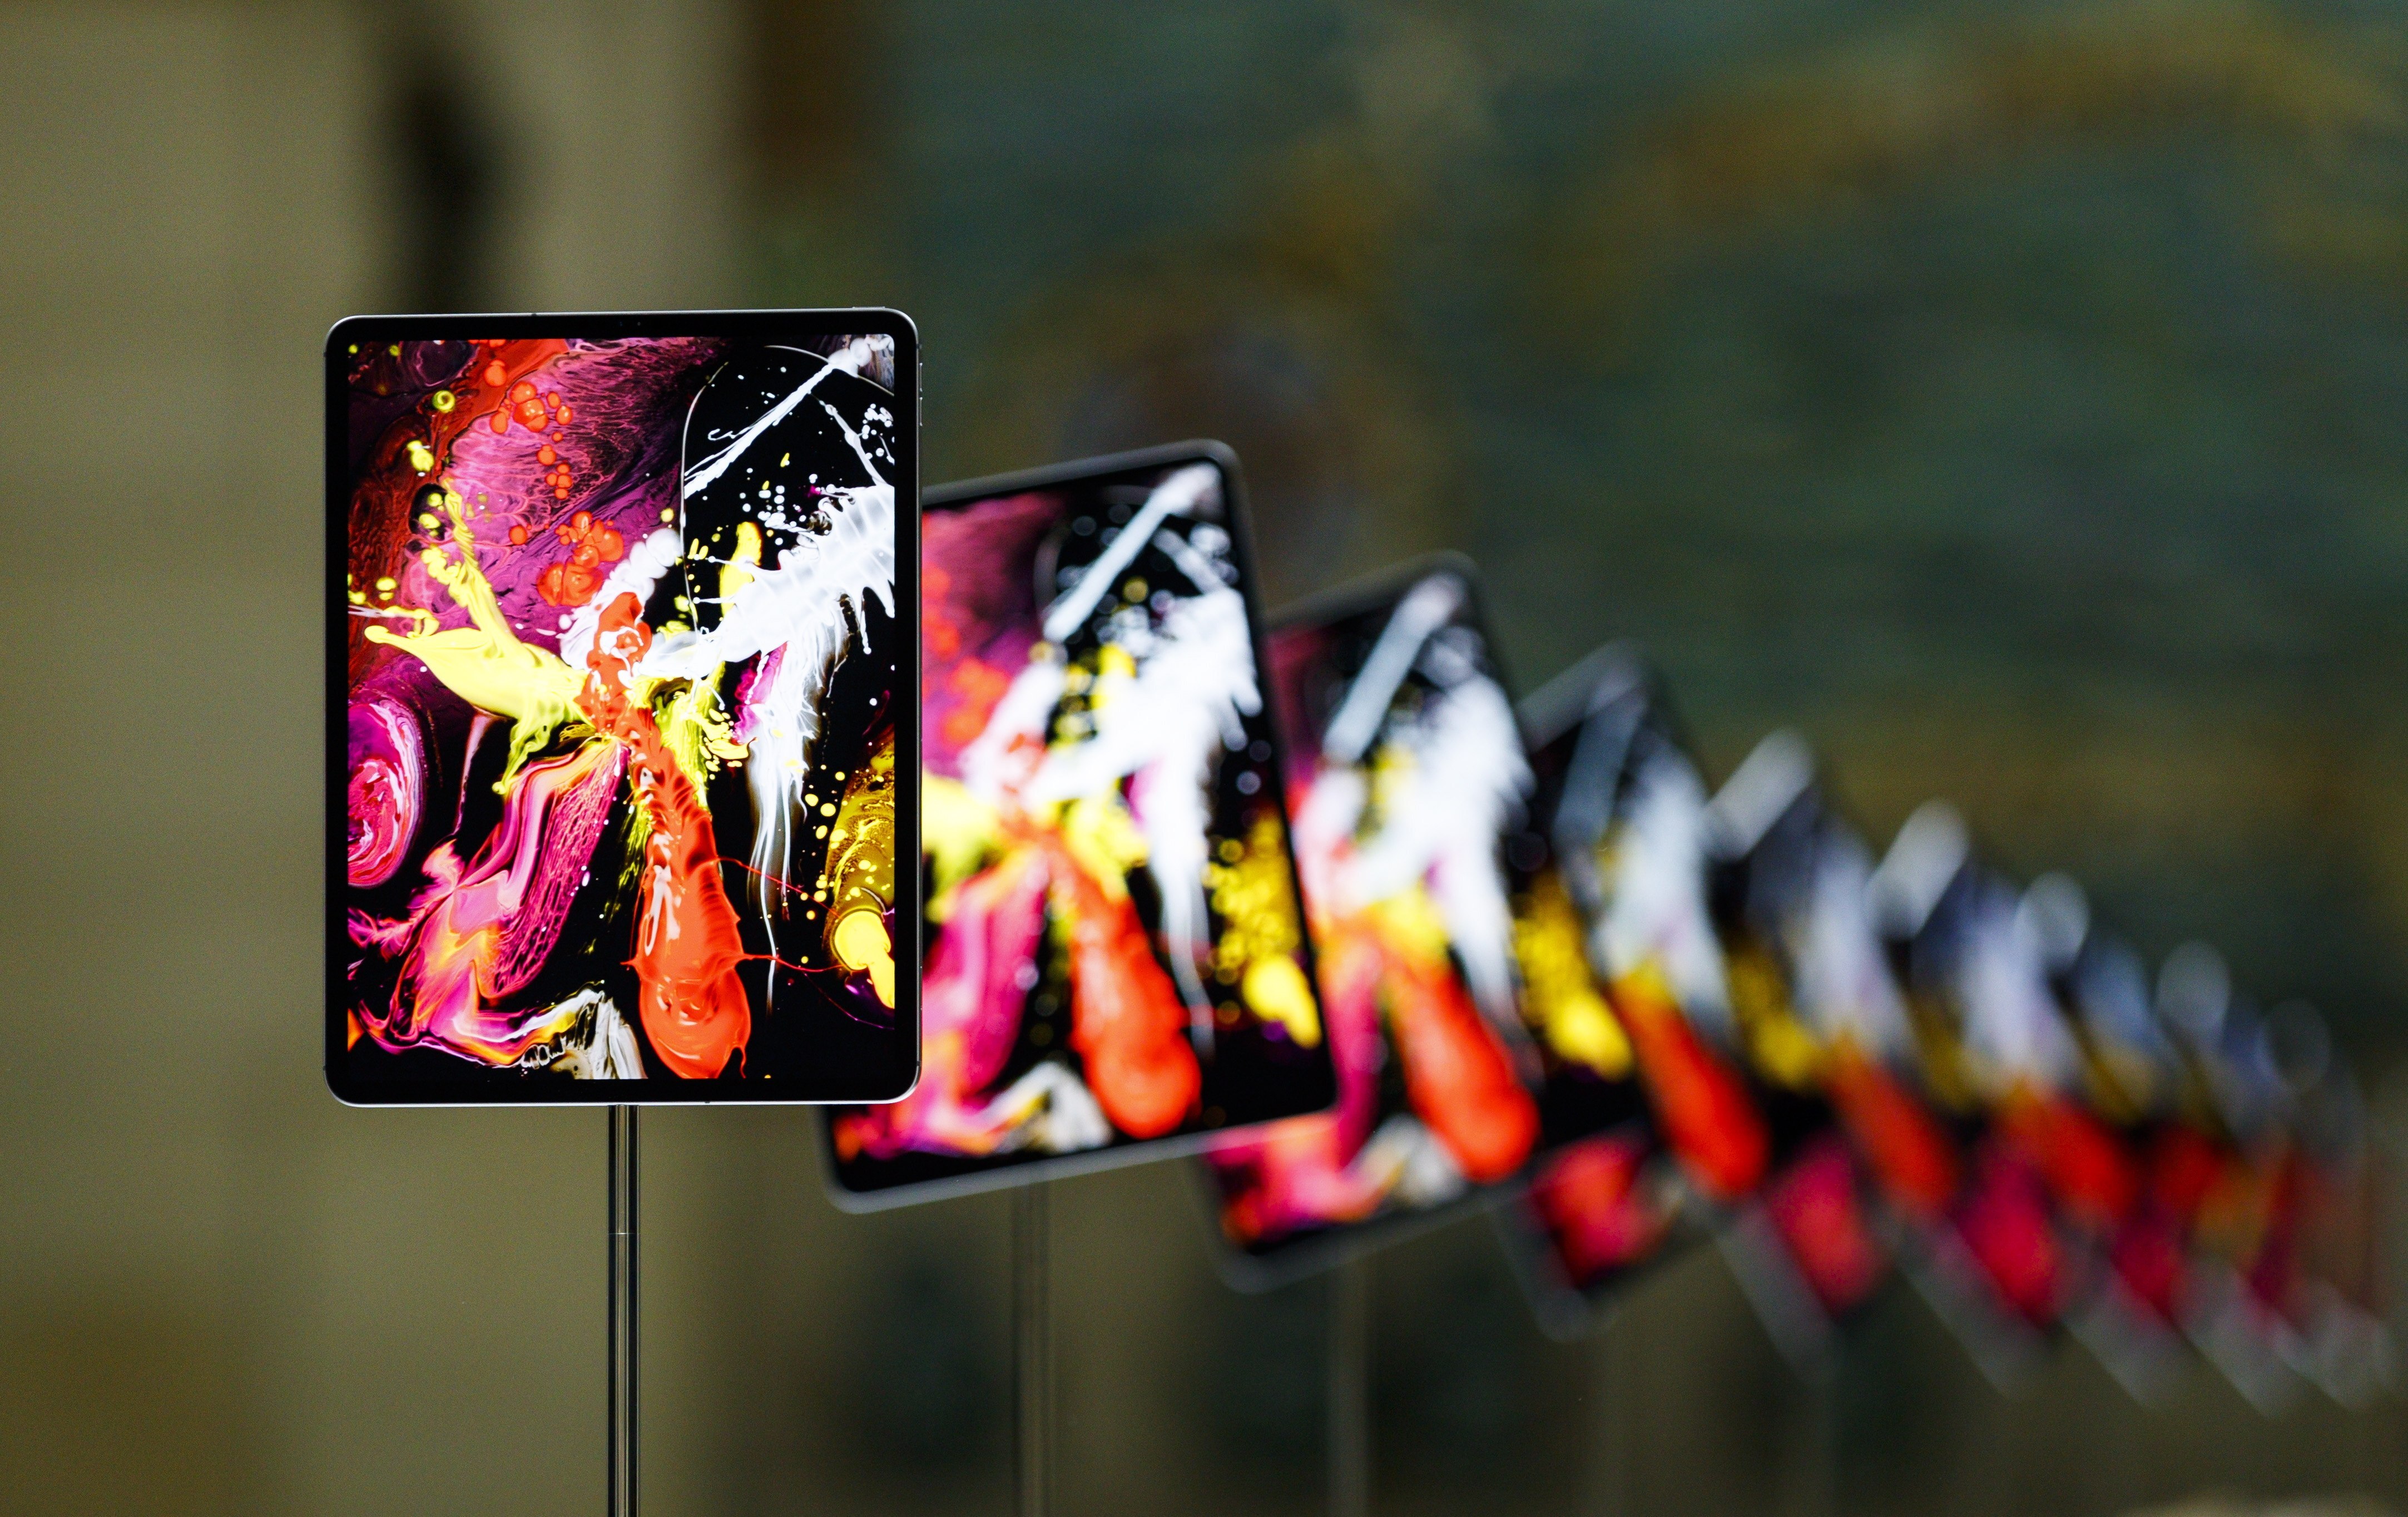 The iPad Pro on display during an Apple hands-on event in One Hanson Place following a presentation at the Howard Gilman Opera House at the Brooklyn Academy of Music in New York City on October 30, 2018. Photo: EPA-EFE